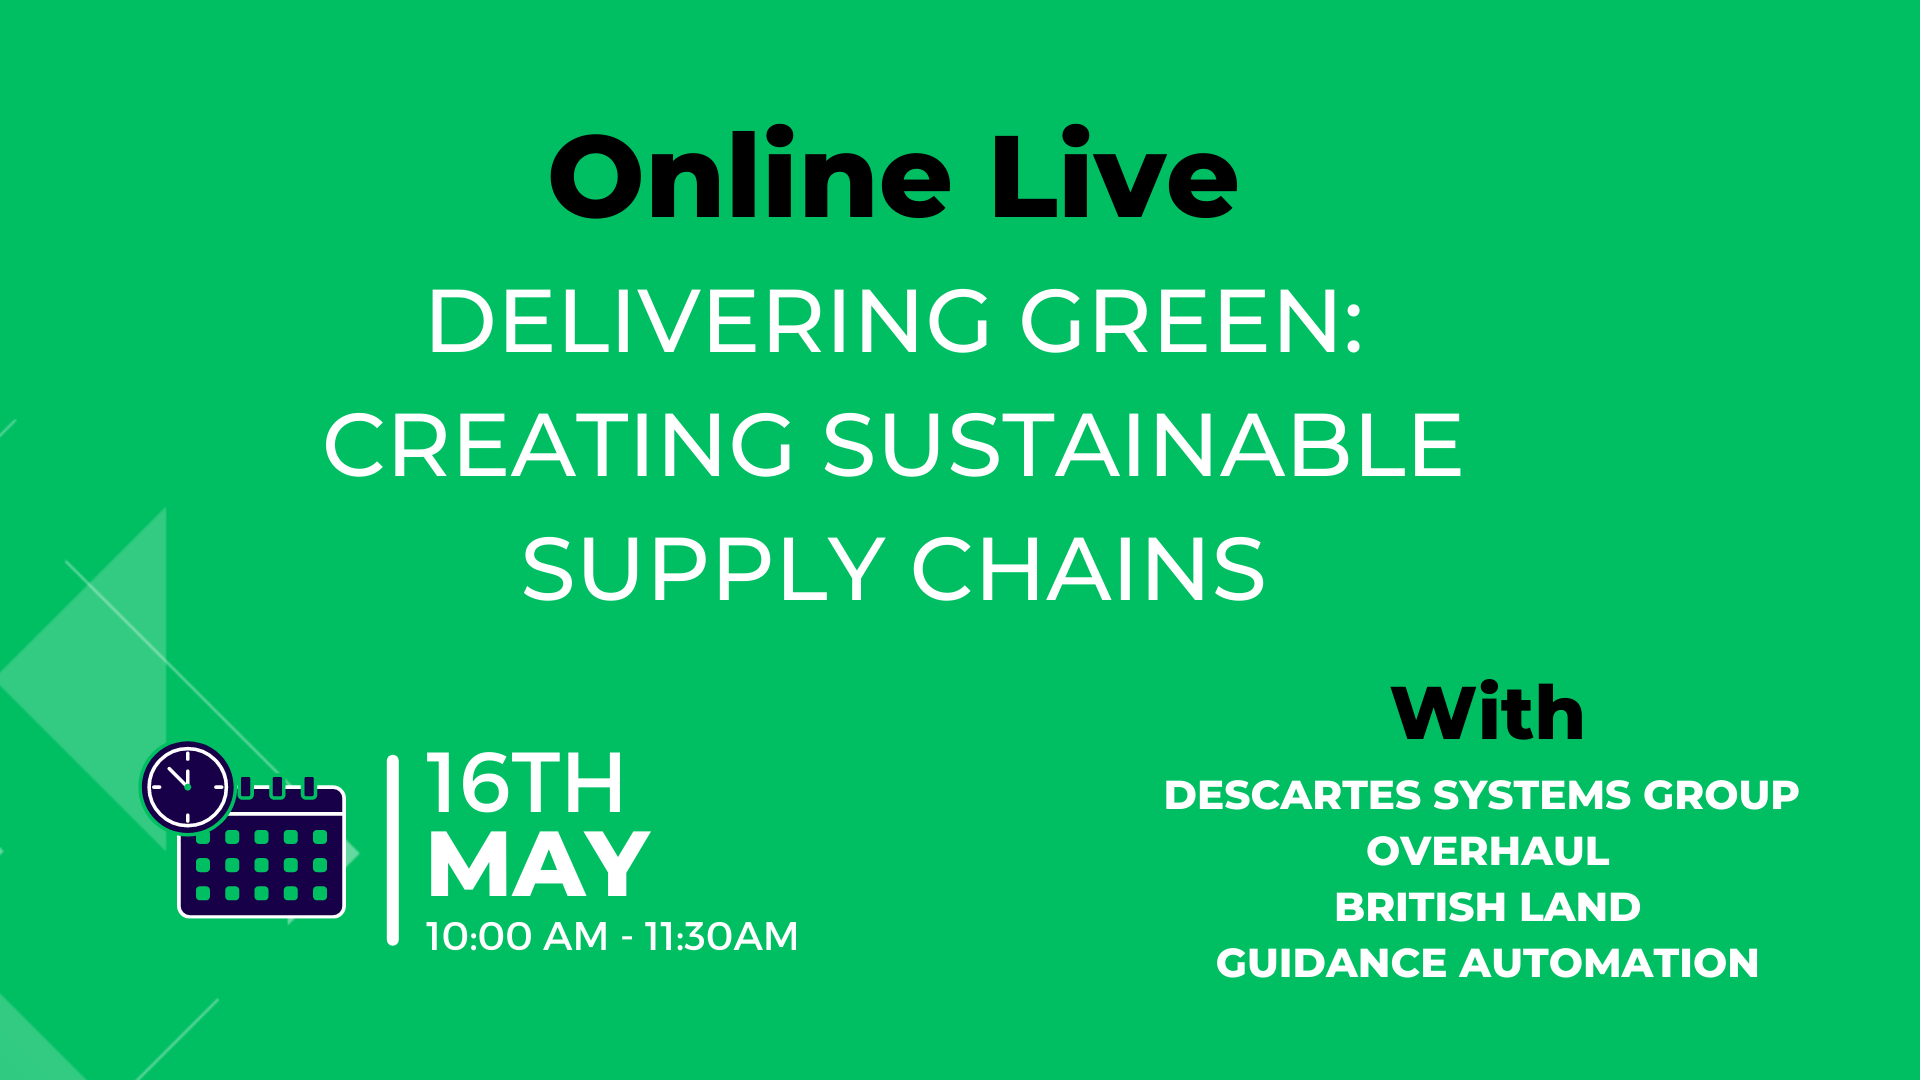 Delivering Green: Creating Sustainable Supply Chains